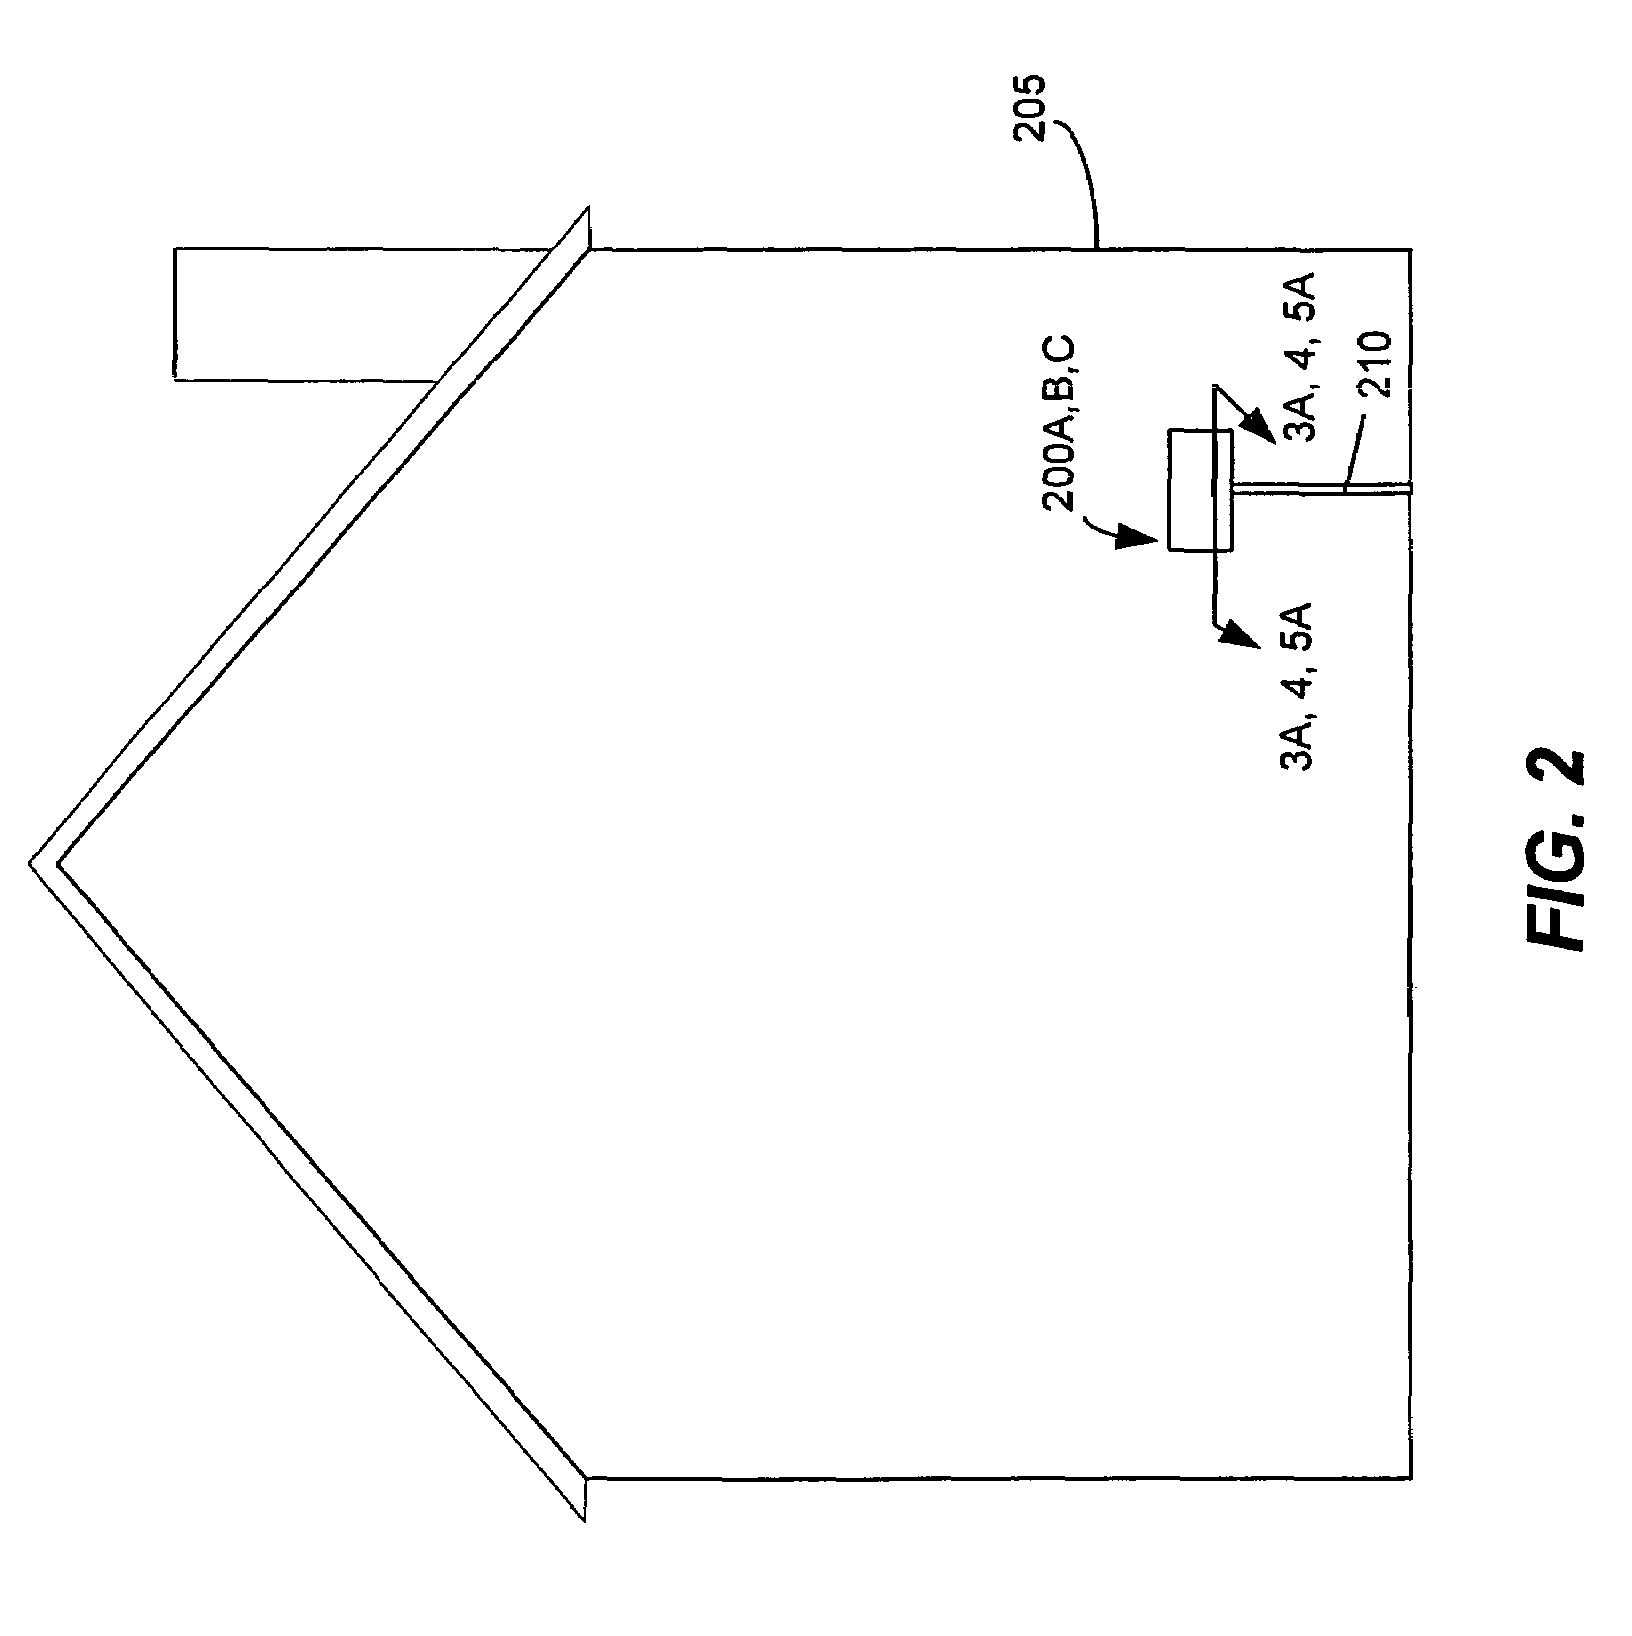 System and method for removing heat from a subscriber optical interface